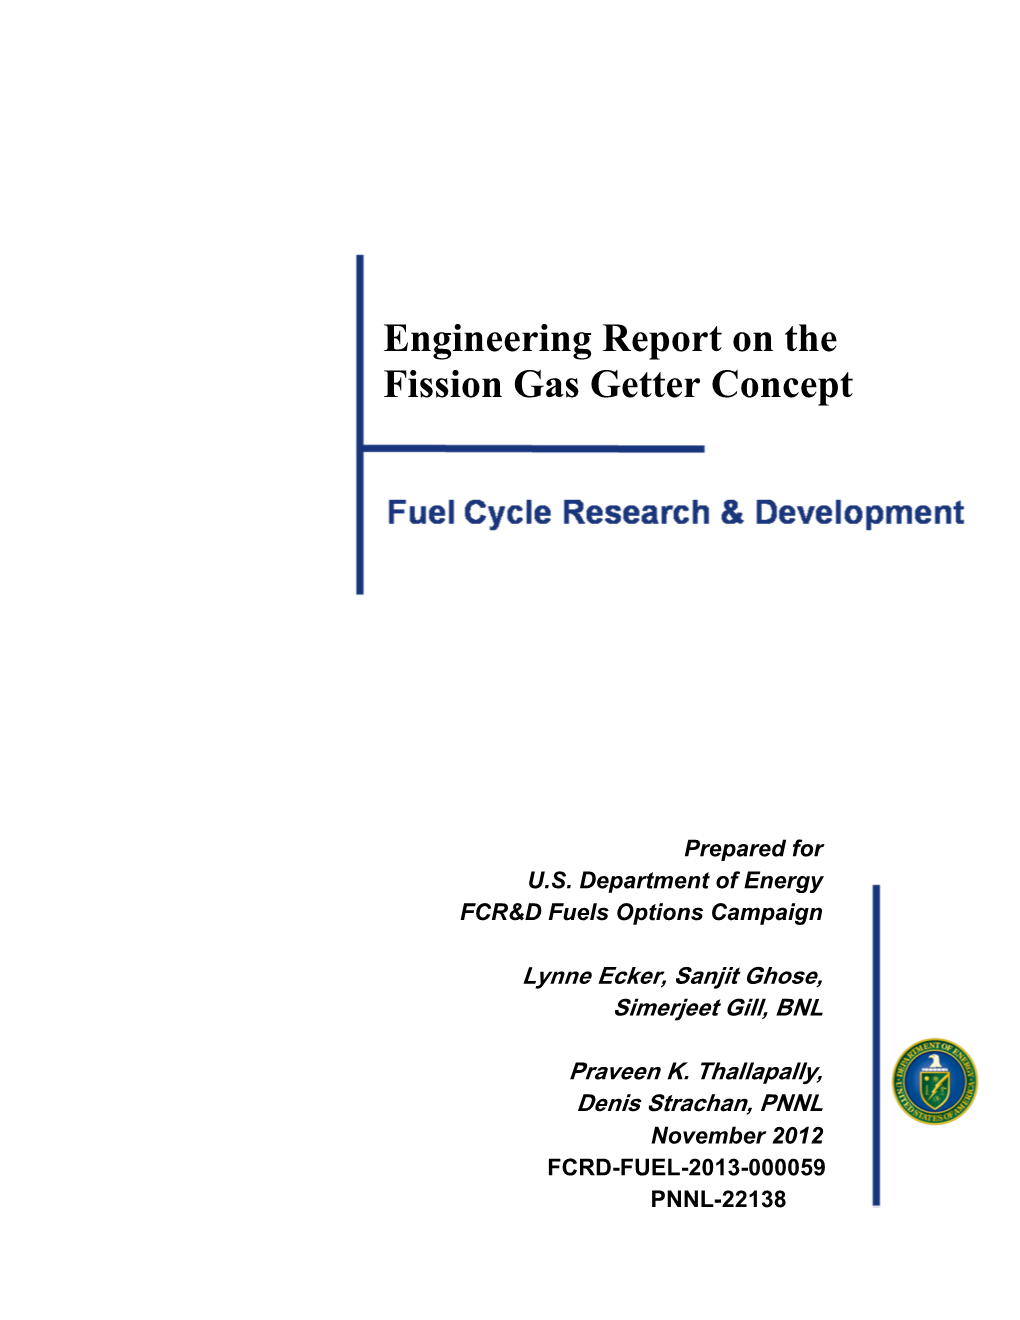 Engineering Report on the Fission Gas Getter Concept